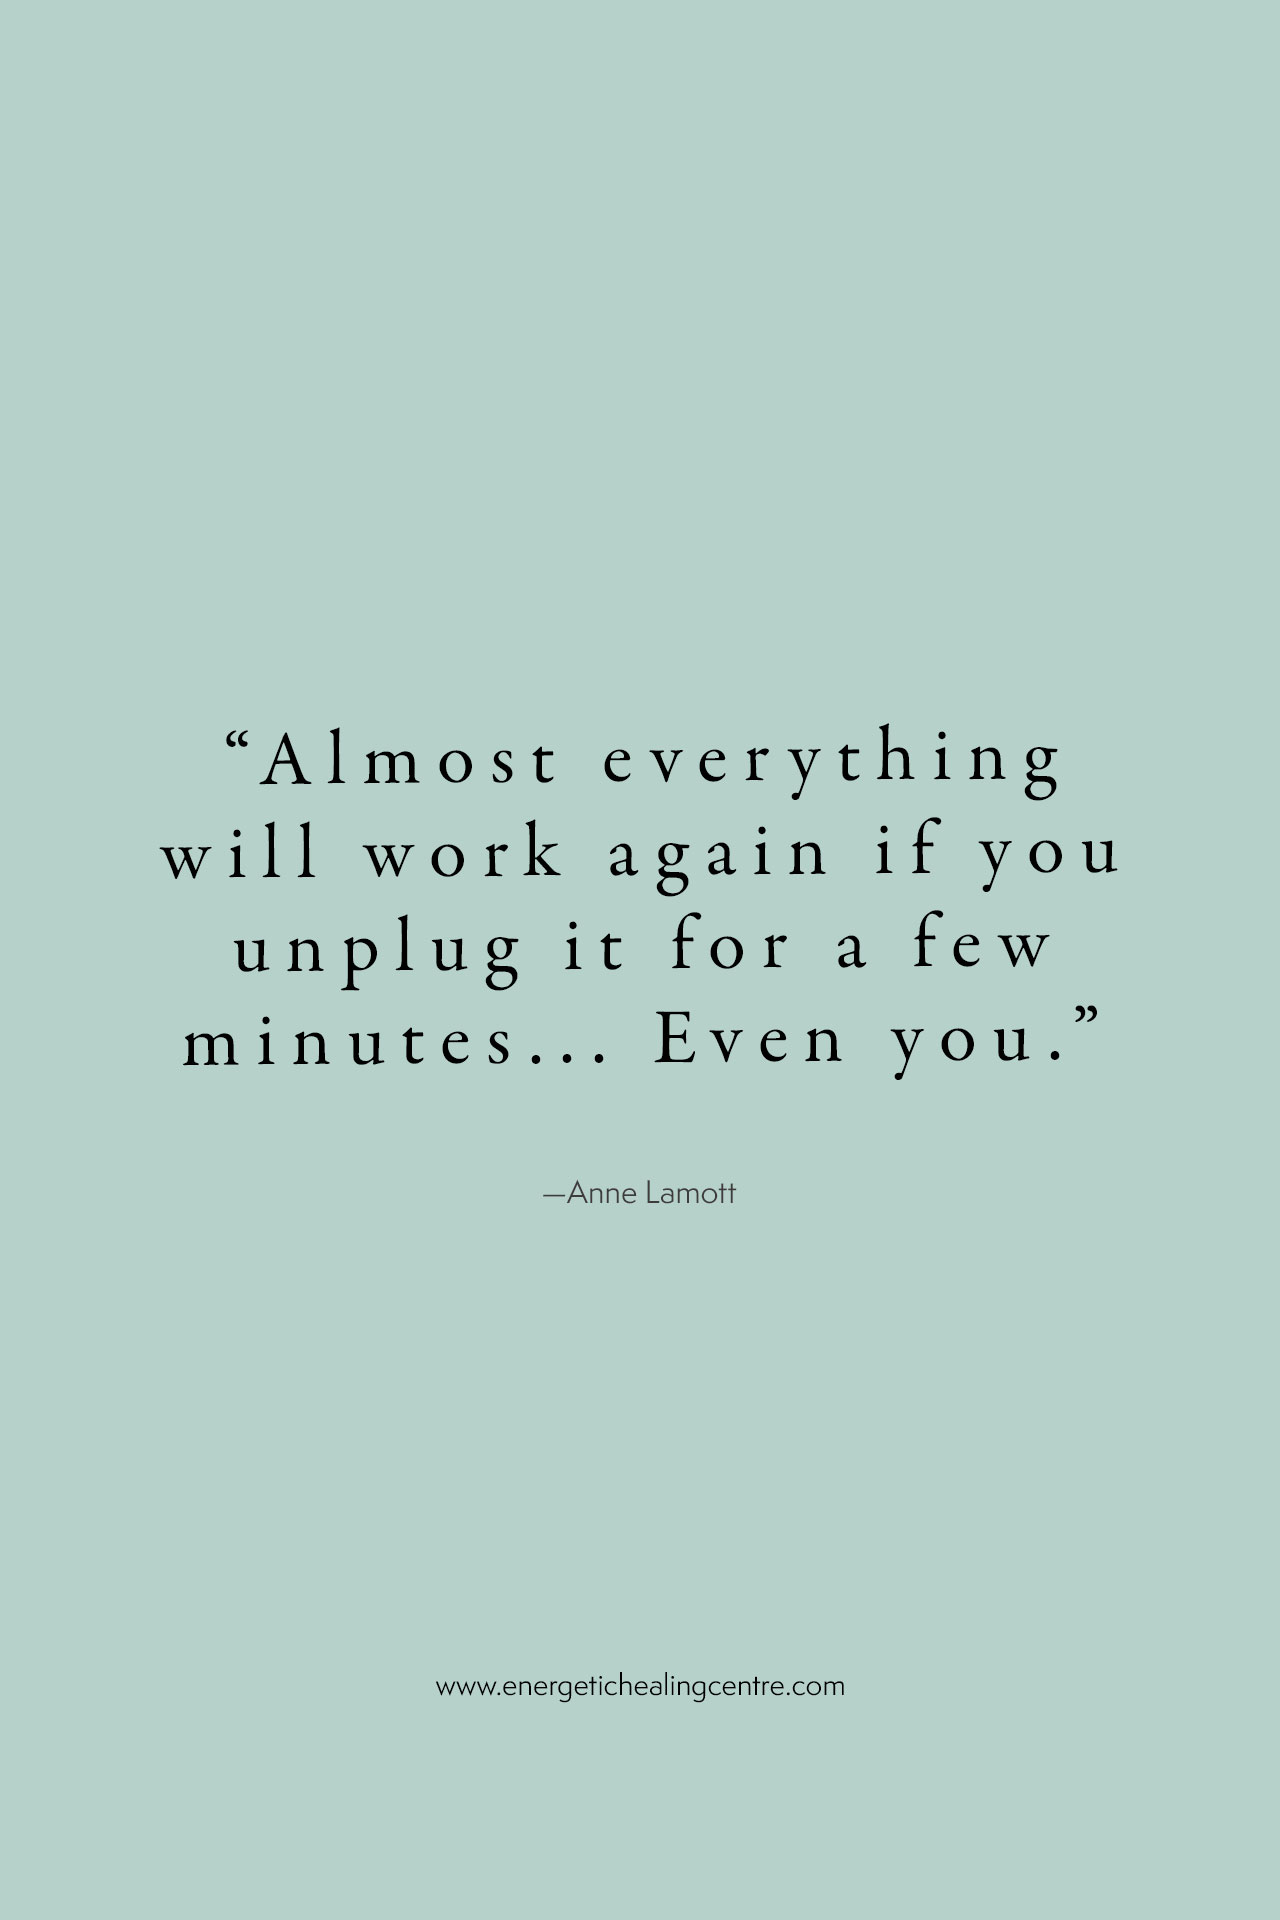 “Almost everything will work again if you unplug it for a few minutes, including you” – Anne Lamott  / what is a microbreak?